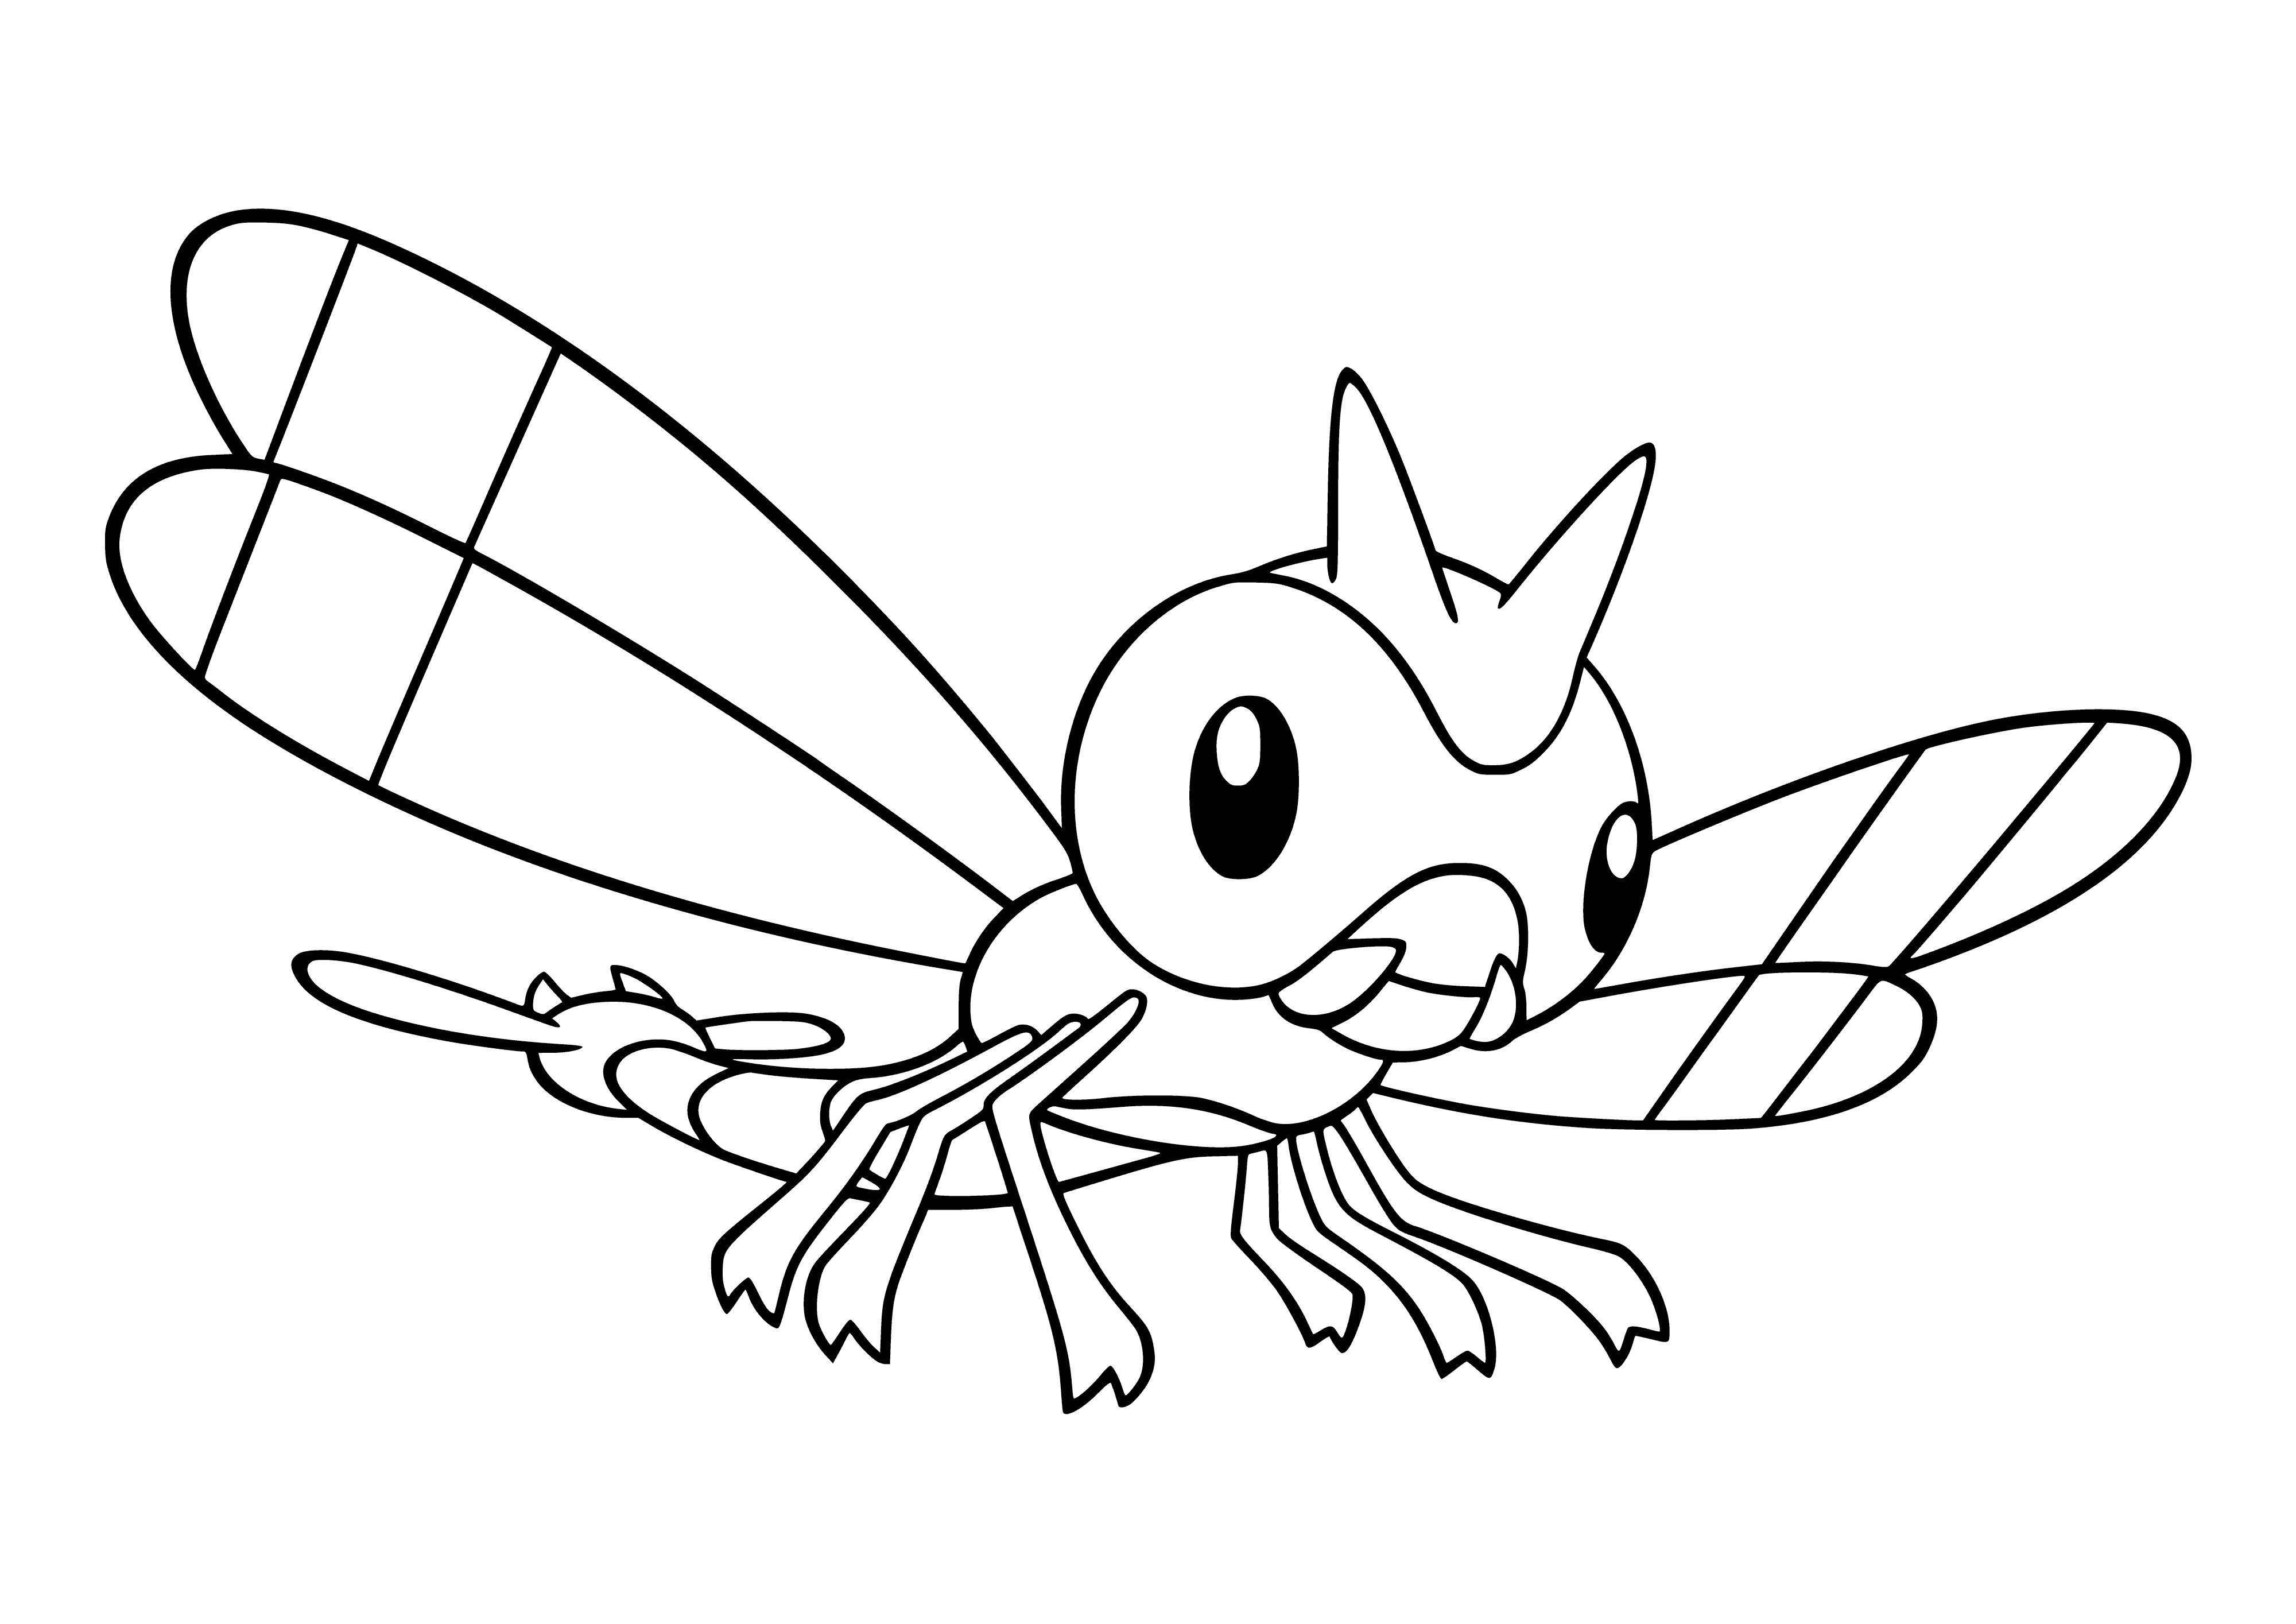 coloring page: Yanma is a small, speedy Pokémon with yellow, black and red markings, and big wings.